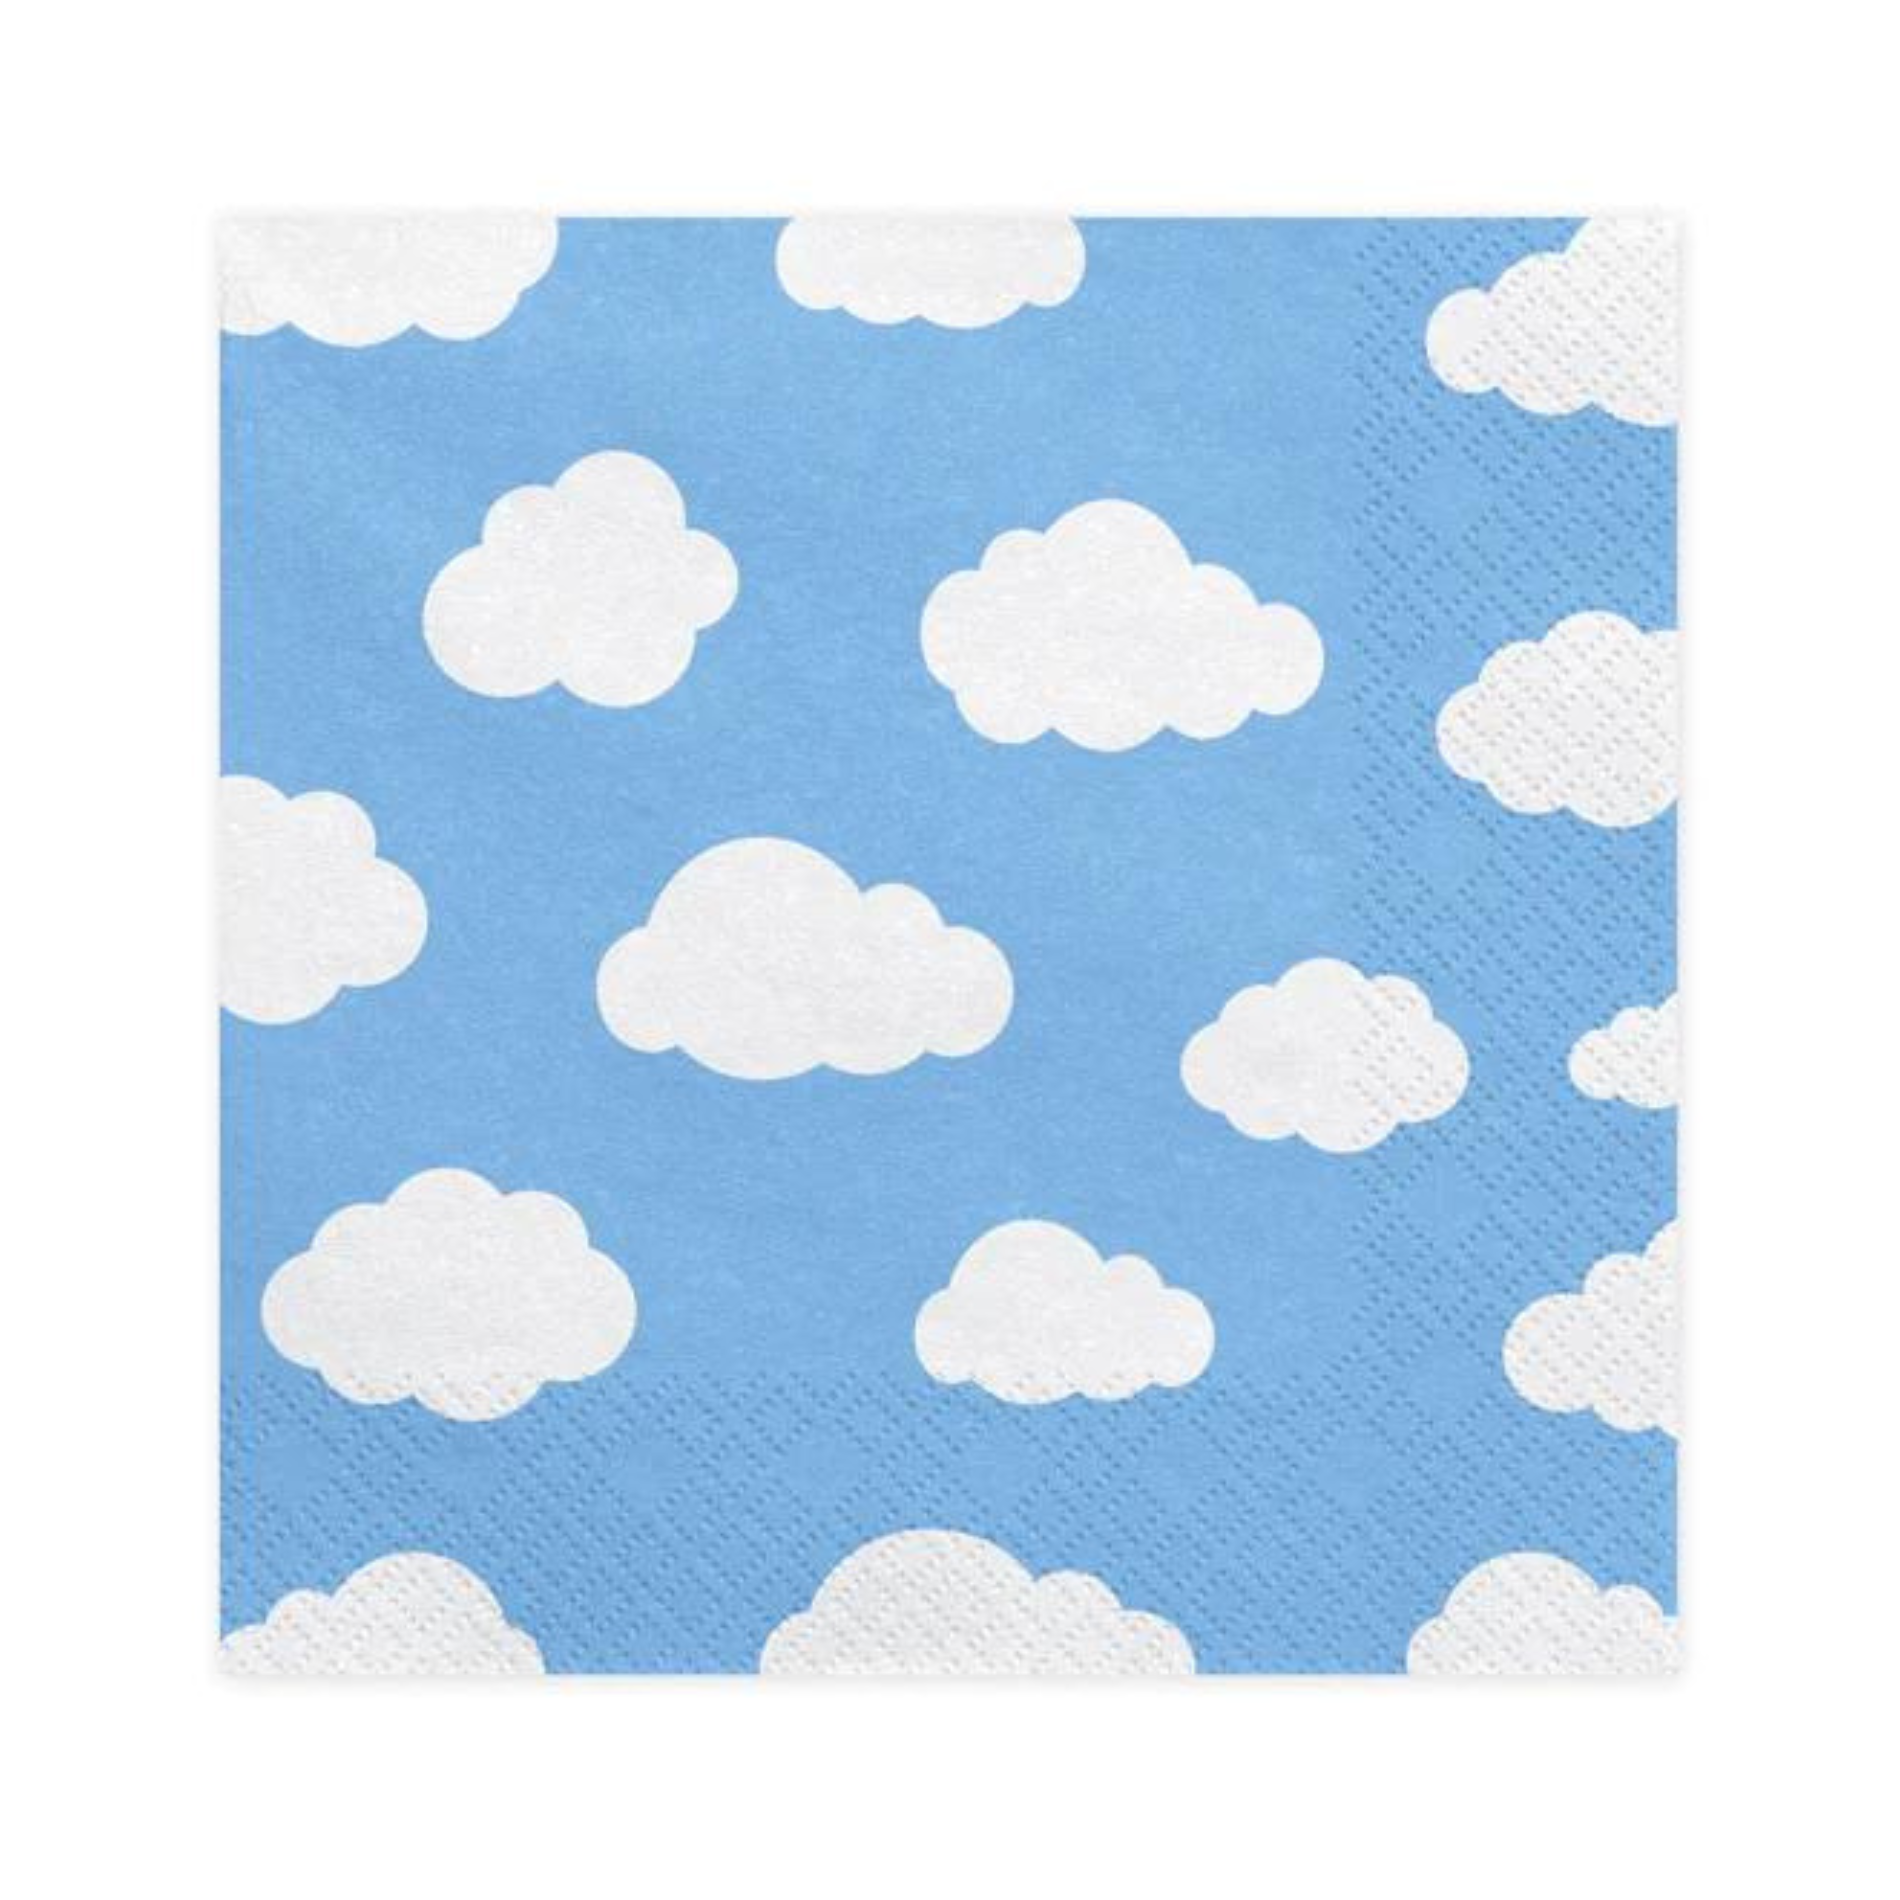 blue napkins with cloud illustrations